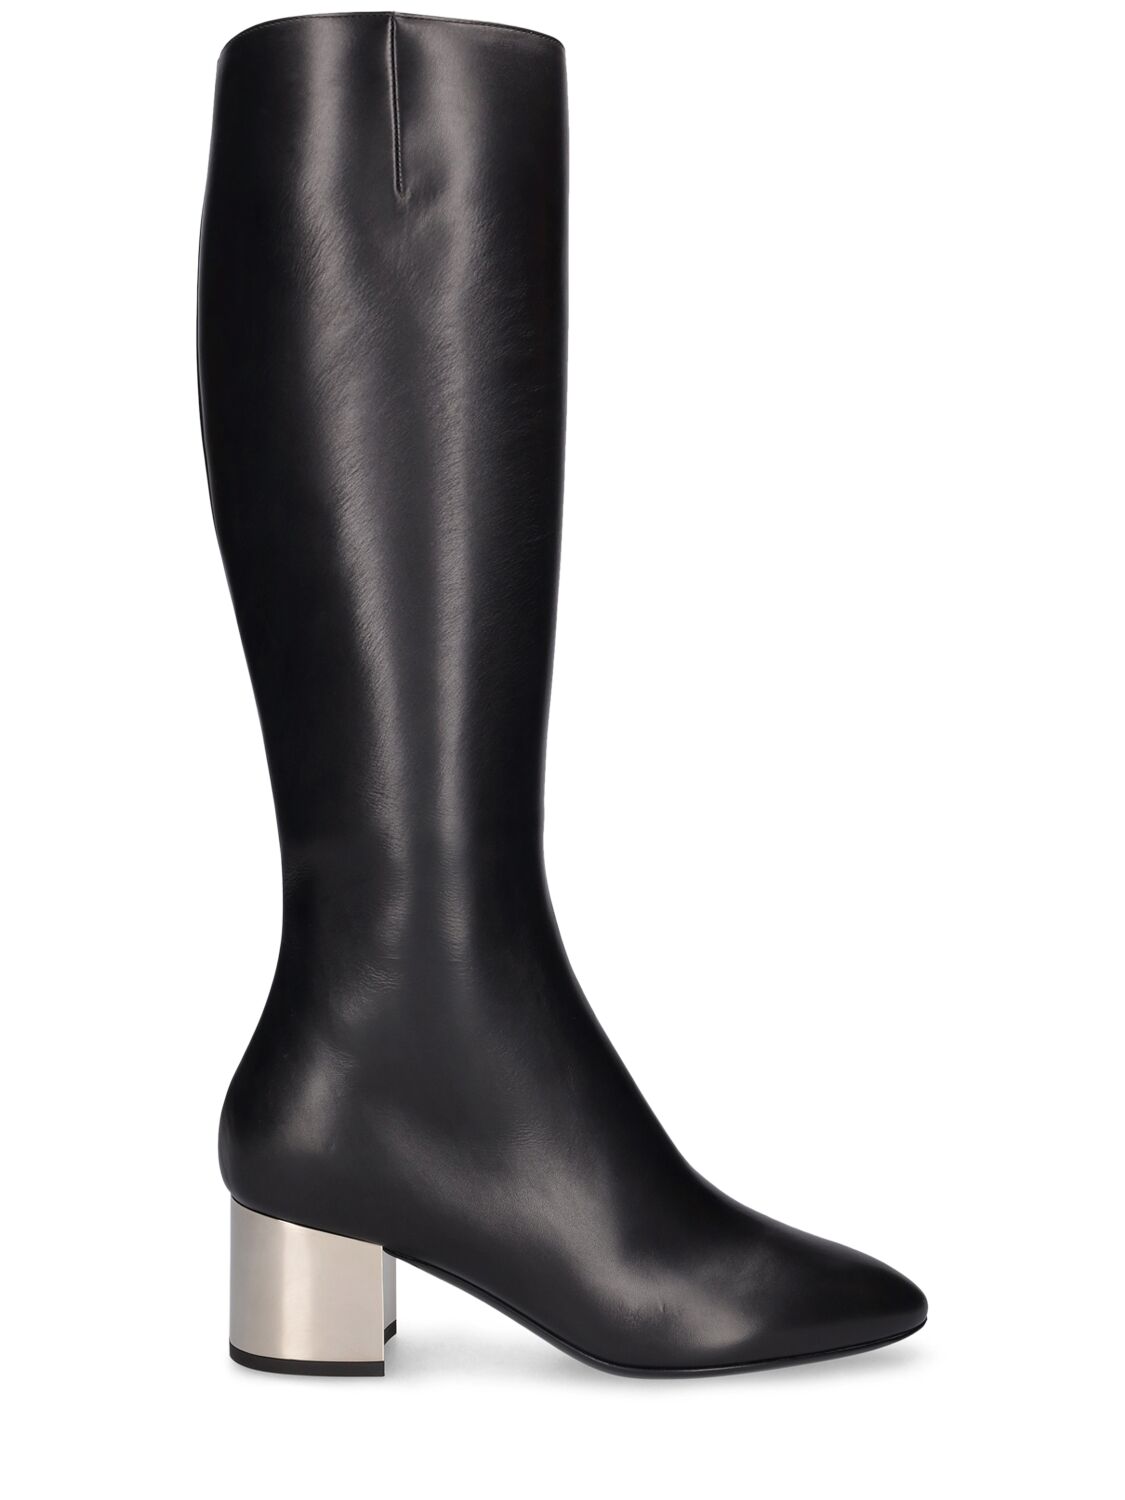 55mm Ali Runway Glossy Leather Boots